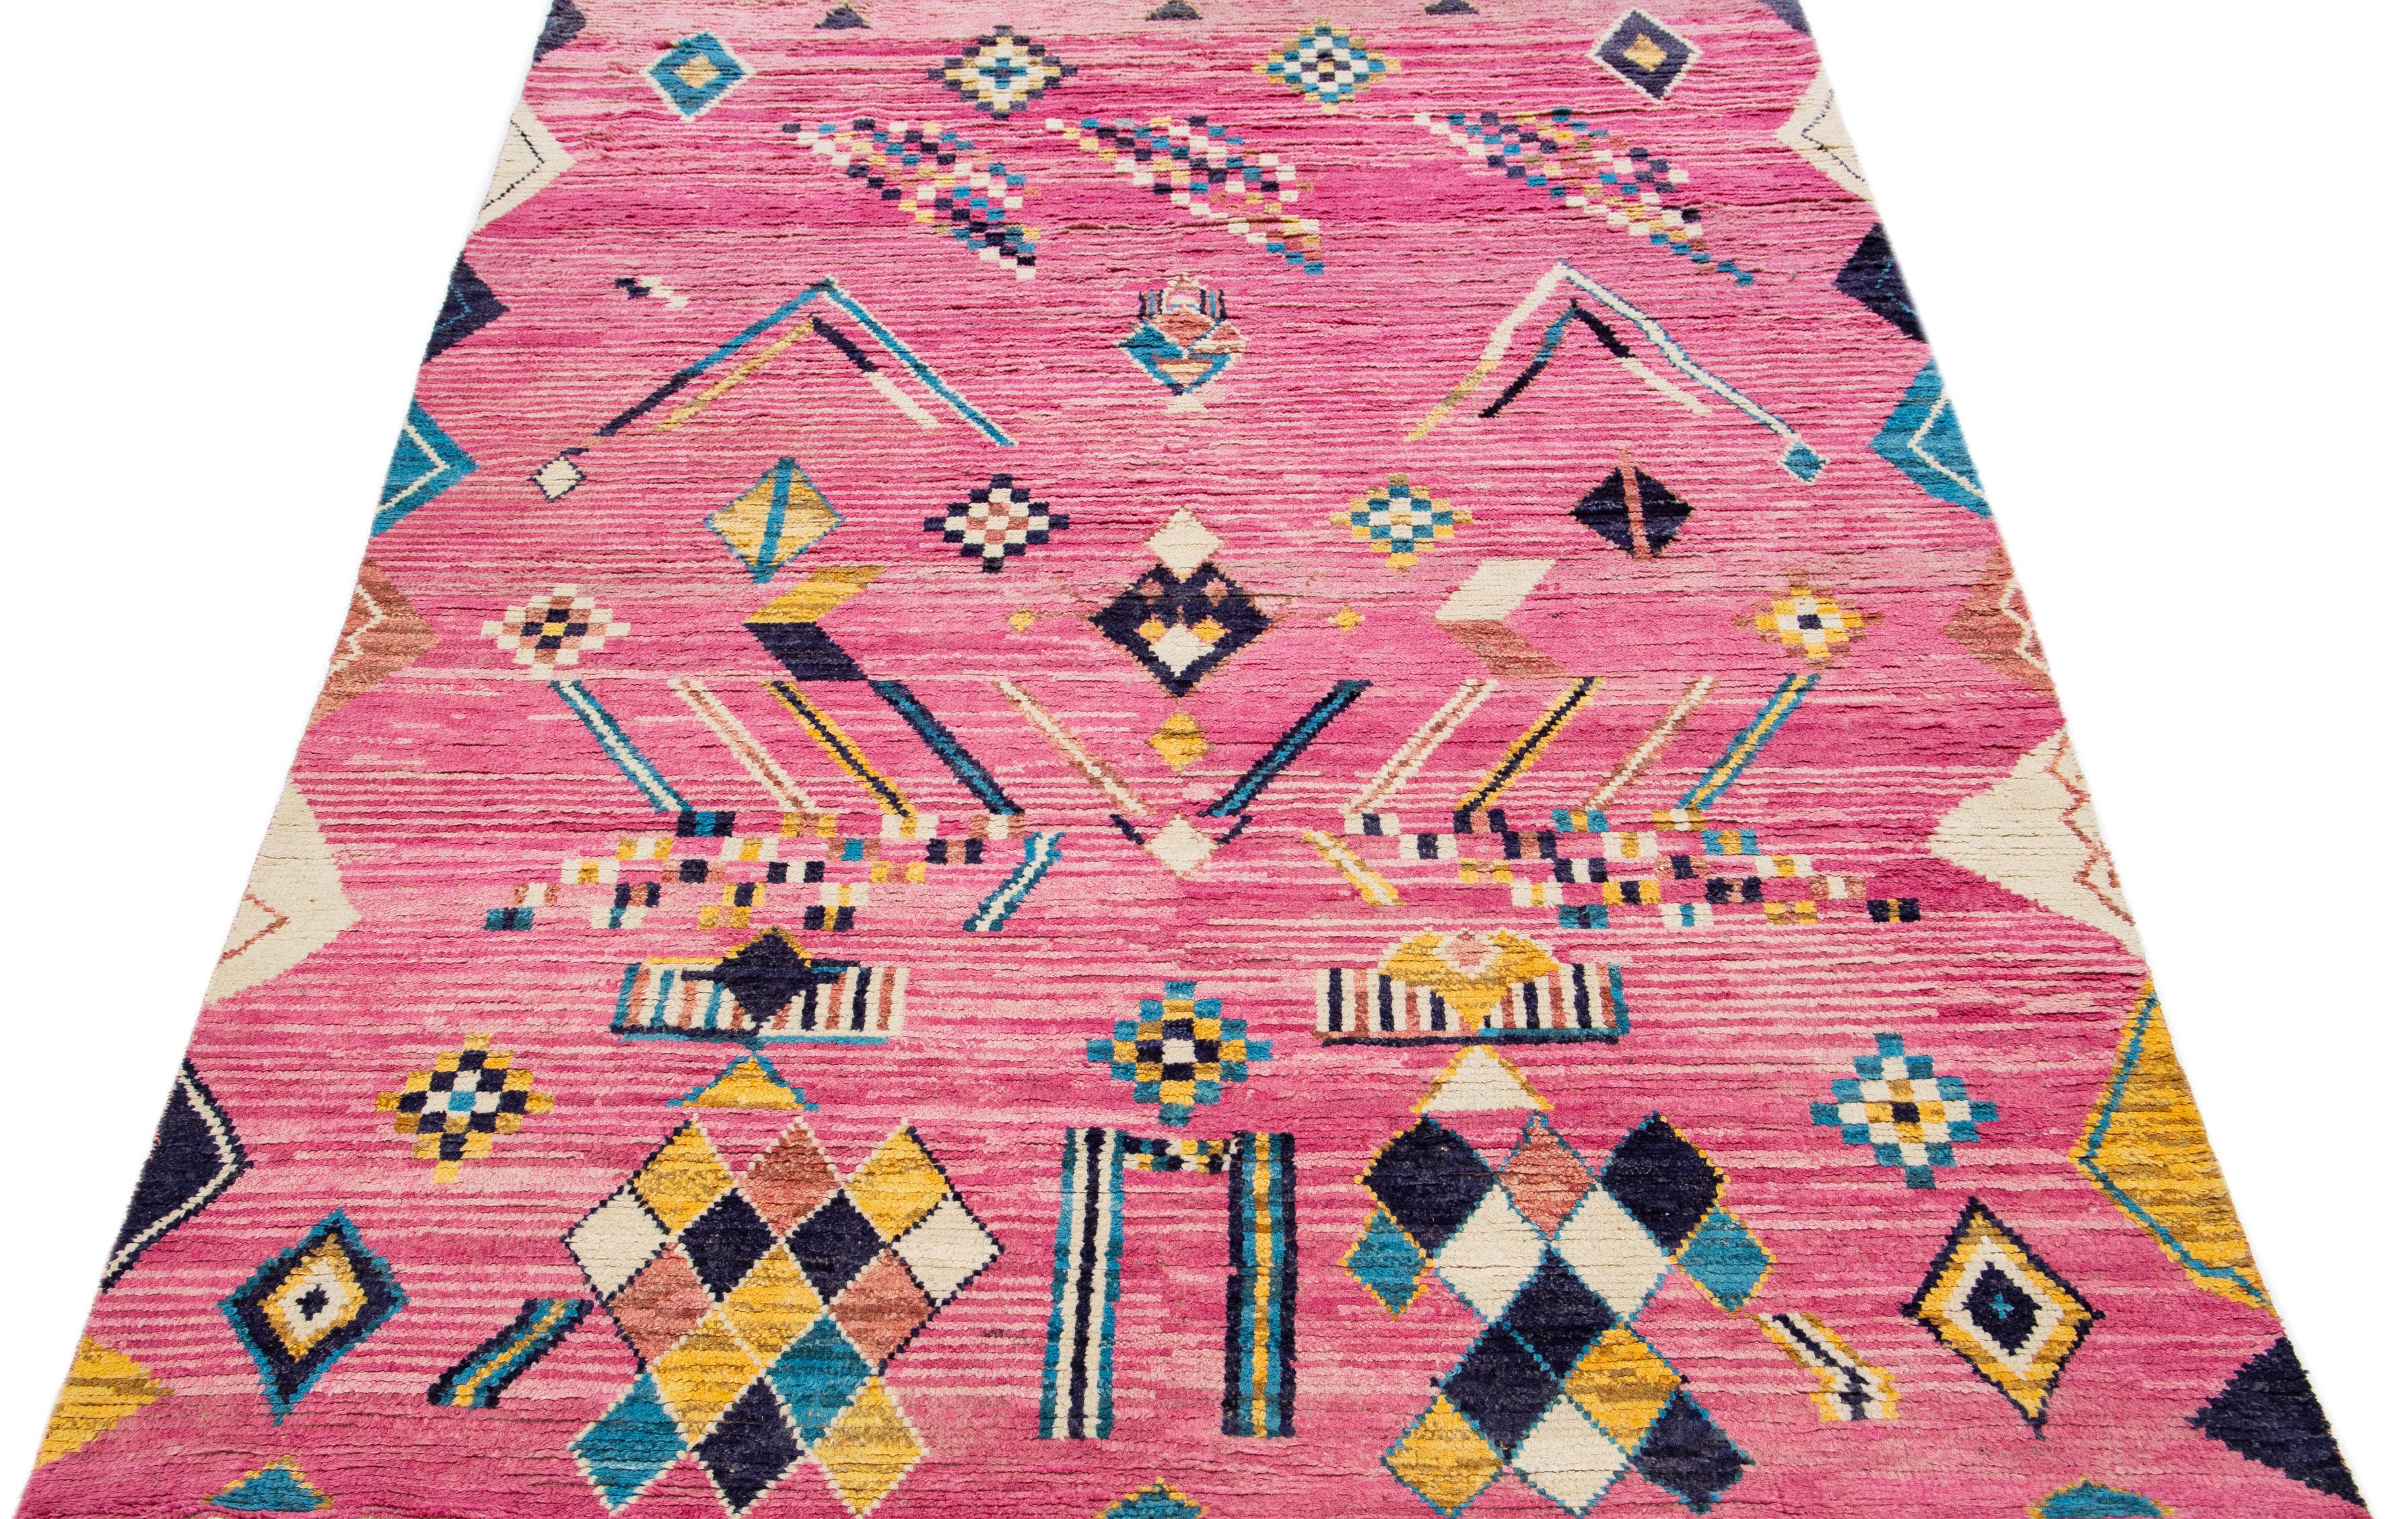 Beautiful moroccan berber style hand-knotted wool rug with a pink field. This piece has multicolor accents in an all-over geometric tribal design.

This rug measures: 8' x 12'5